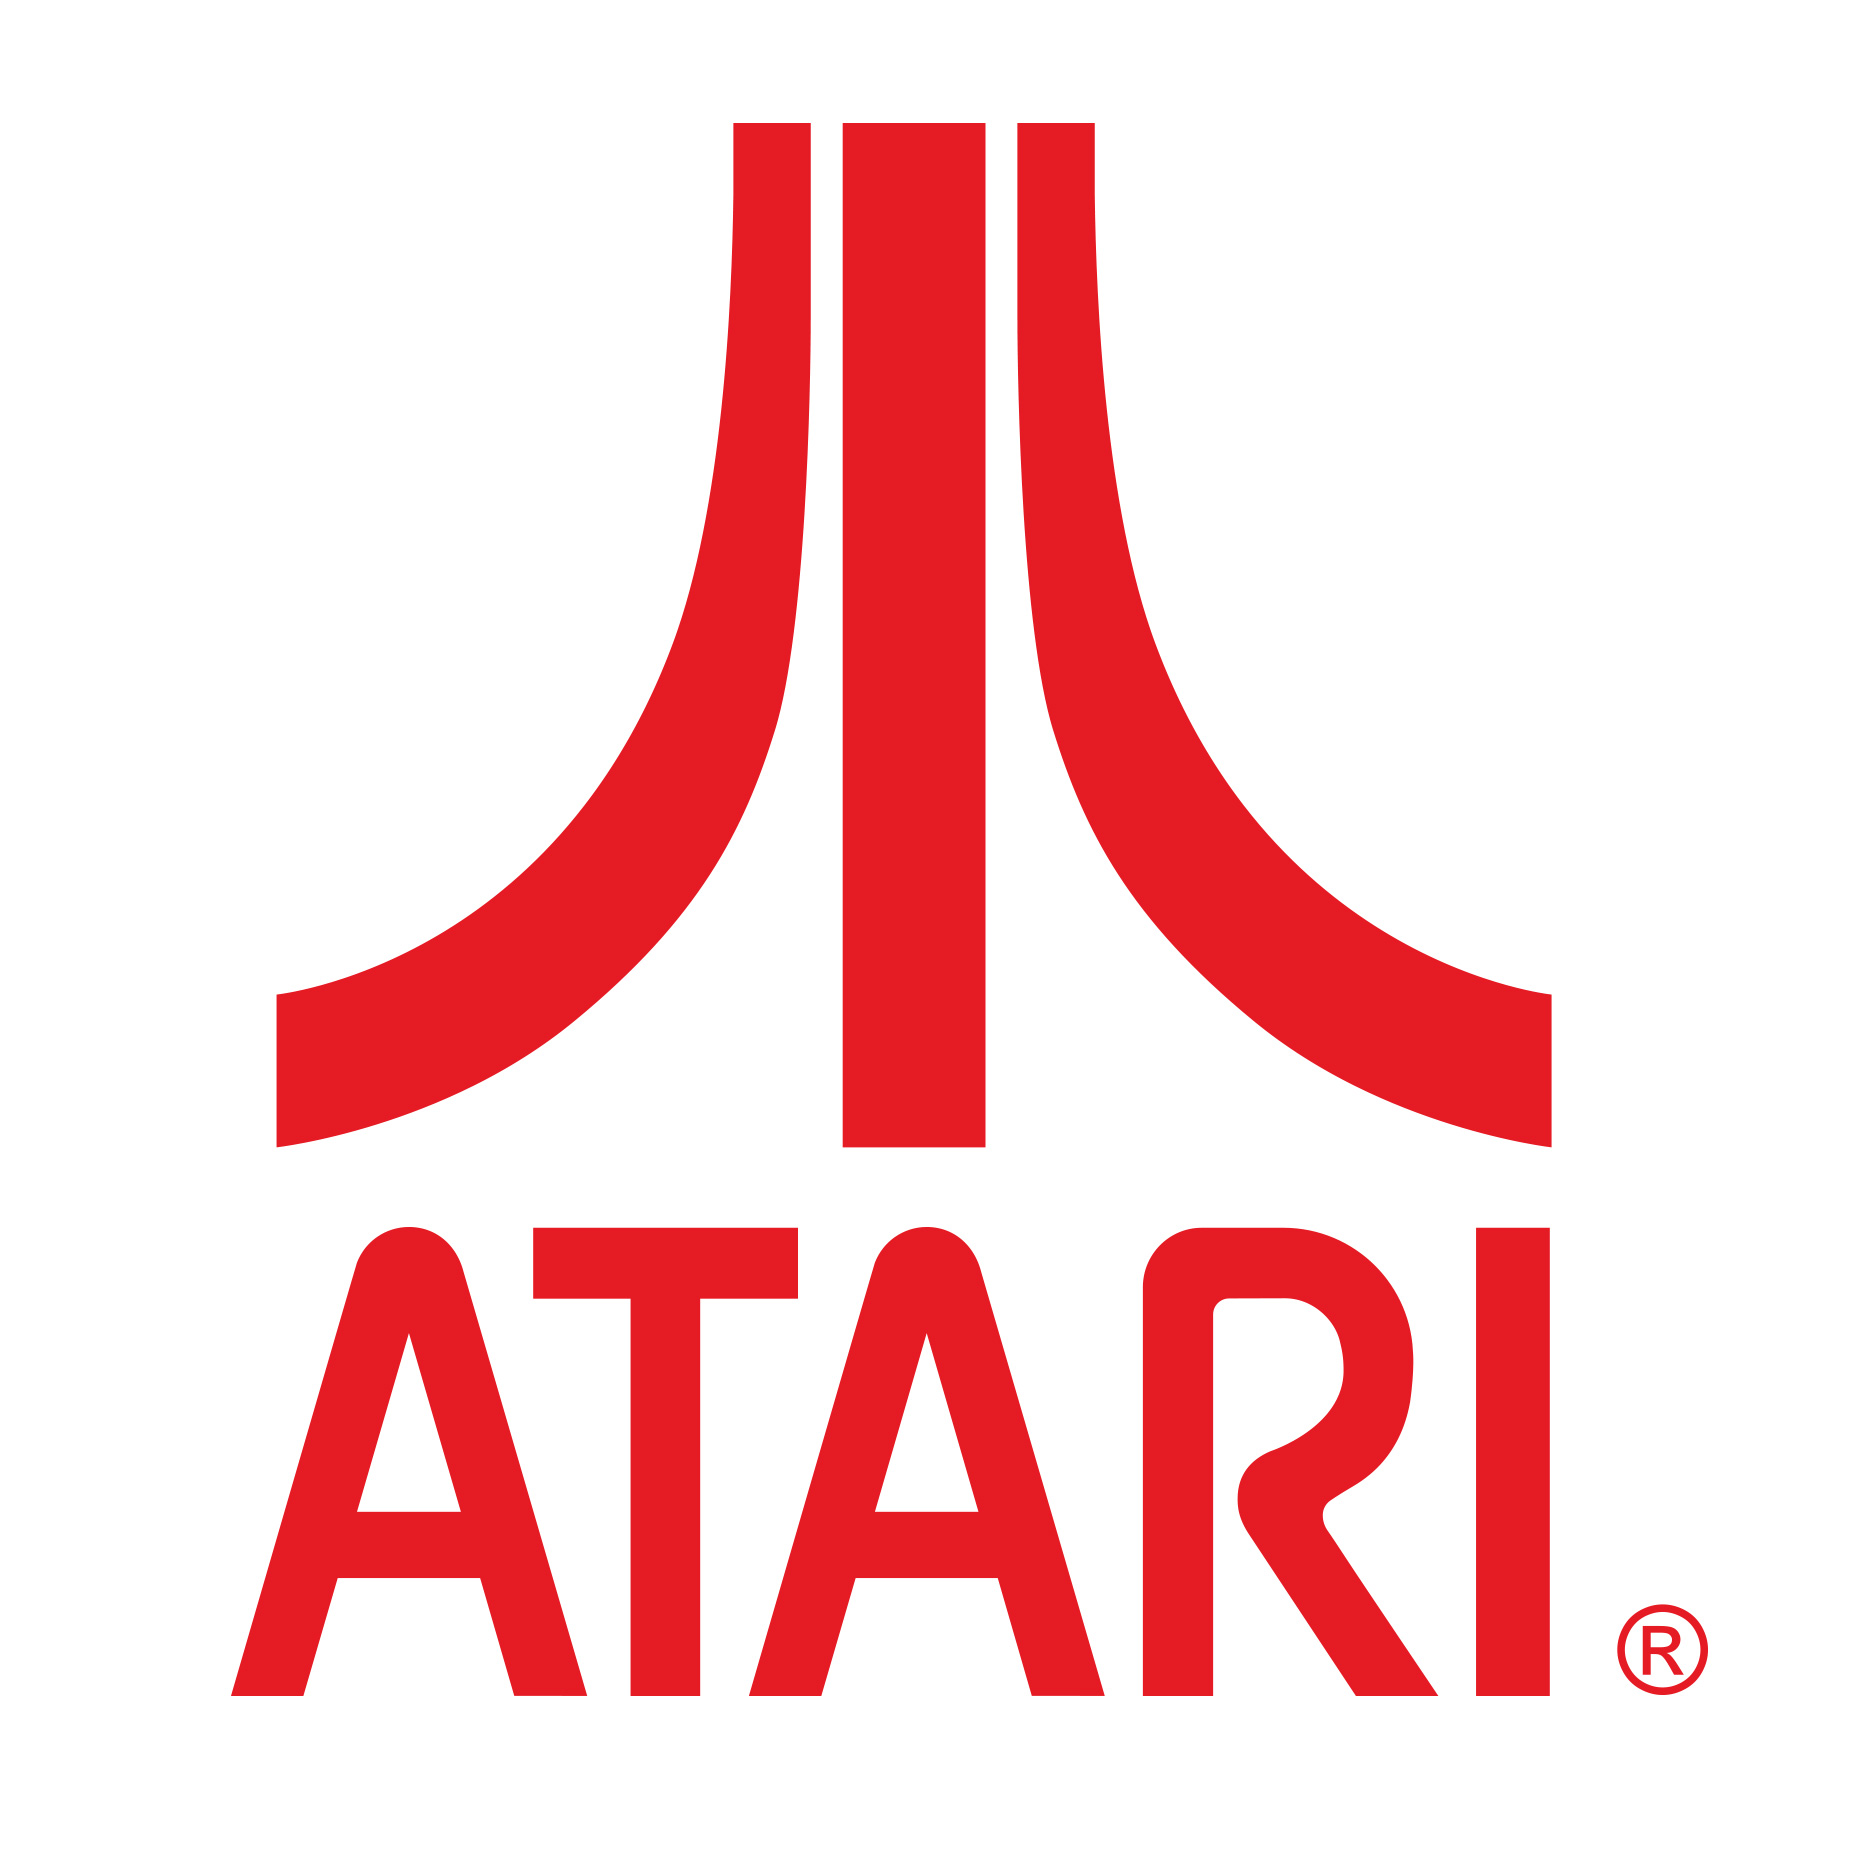    Atari enters into an agreement to acquire Digital Eclipse           PARIS, FRANCE (October [31], 2023 - 8.00 am CET) - Atari® (the “Company”) — one of...